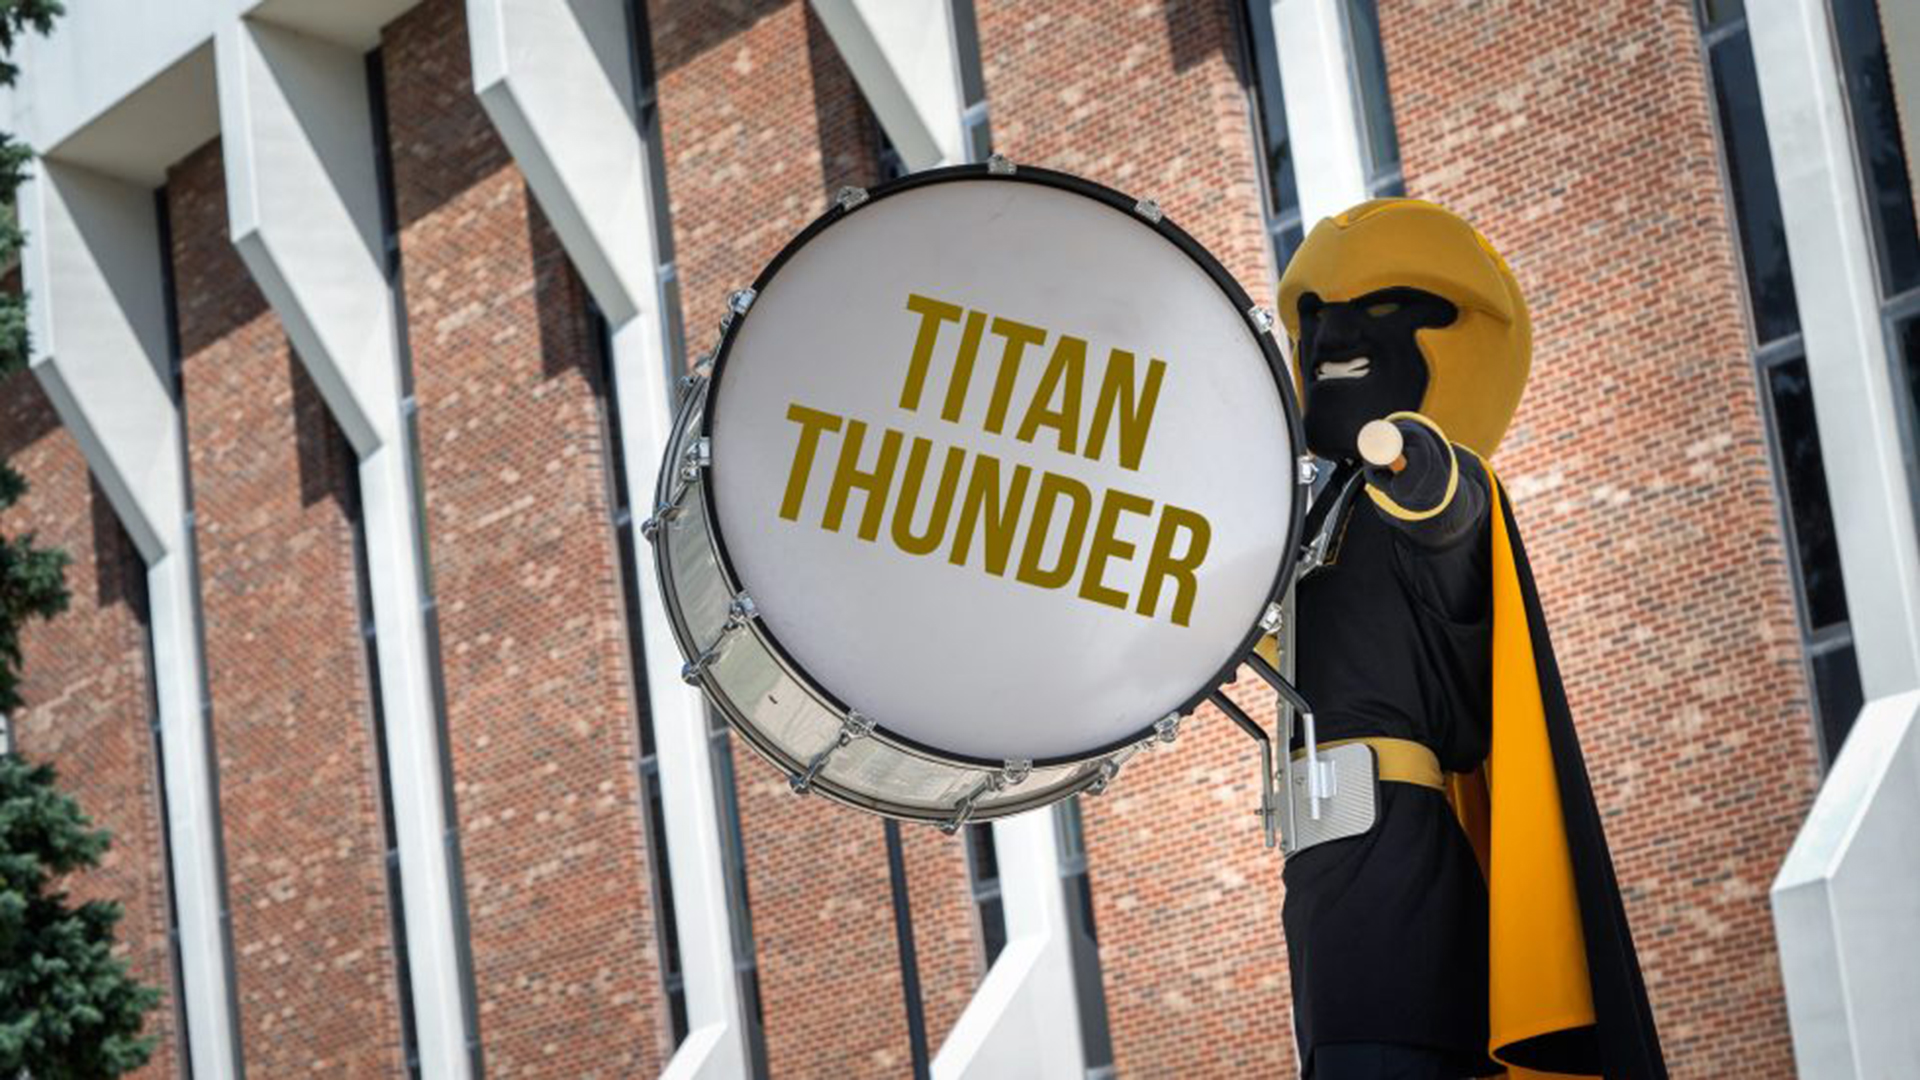 Titan Thunder, The New UW-Oshkosh Marching Band, To Debut In 2022